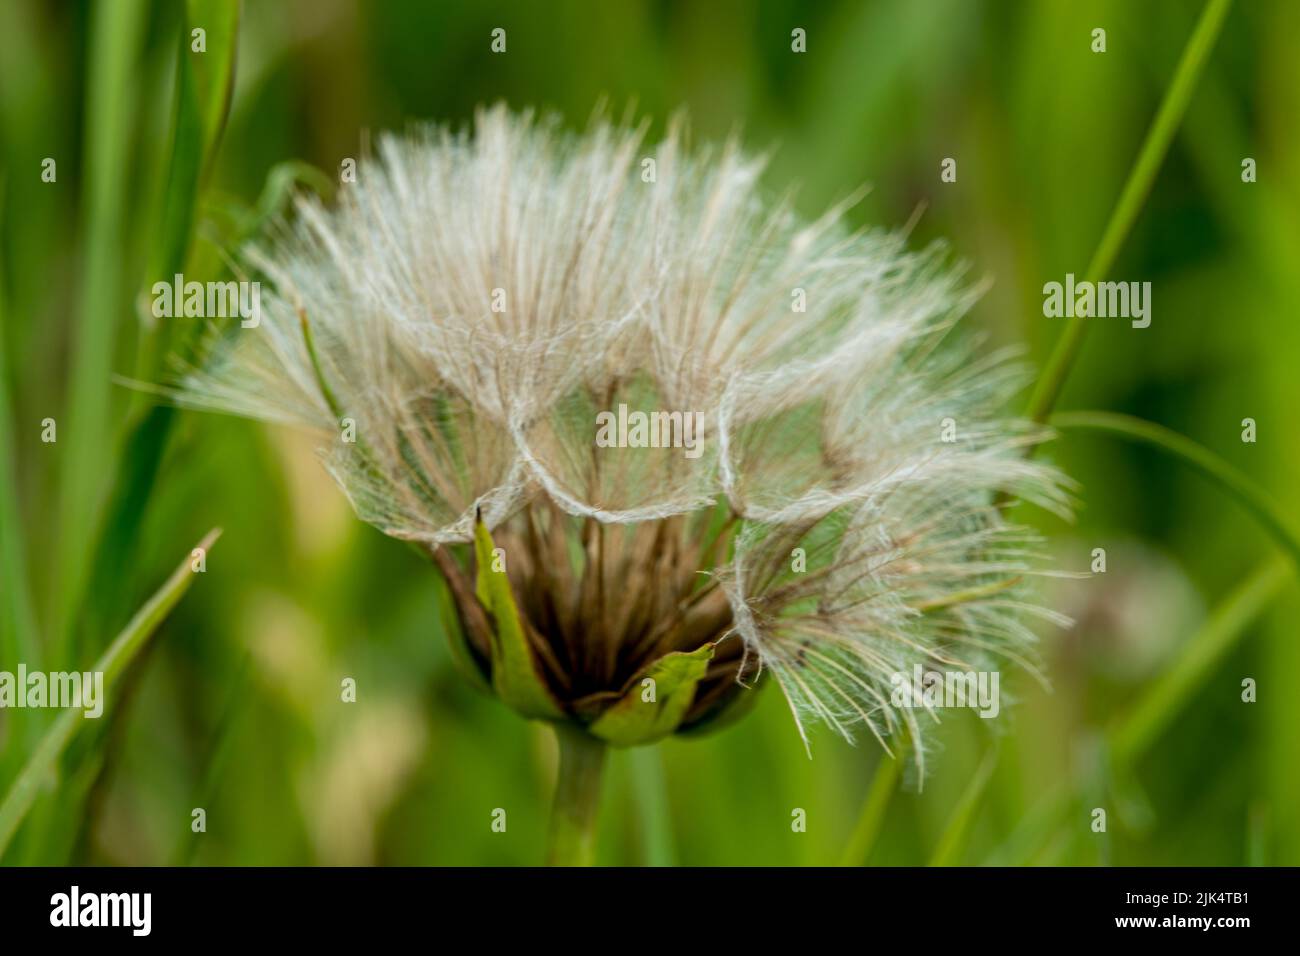 detailed close up of Meadow salsify (Tragopogon pratensis, showy goat's-beard or meadow goat's beard) Stock Photo